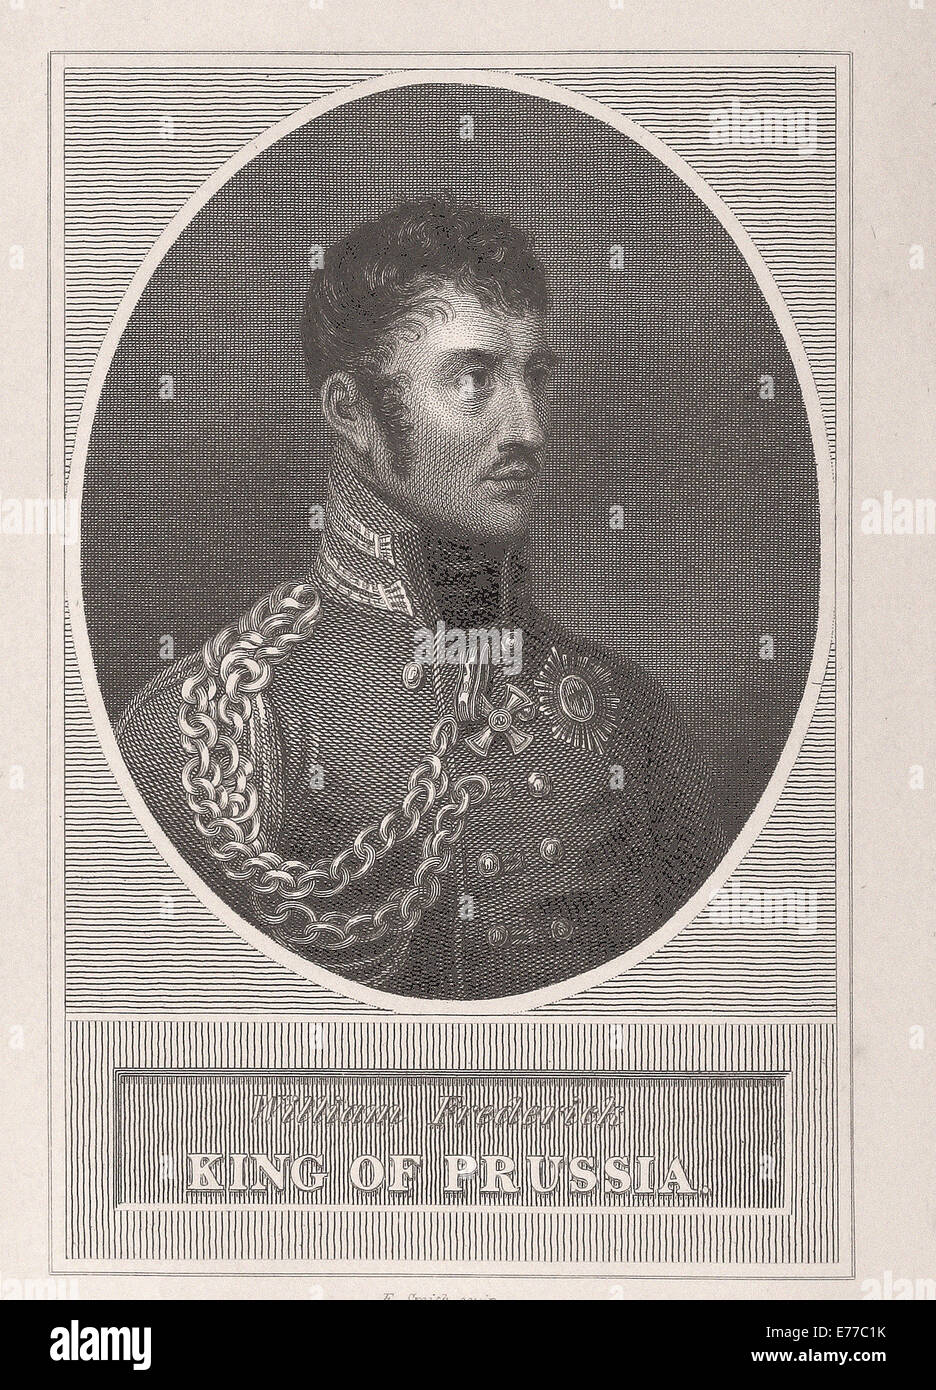 Willem Frederick King of Prussia- British incisione - XIX secolo Foto Stock